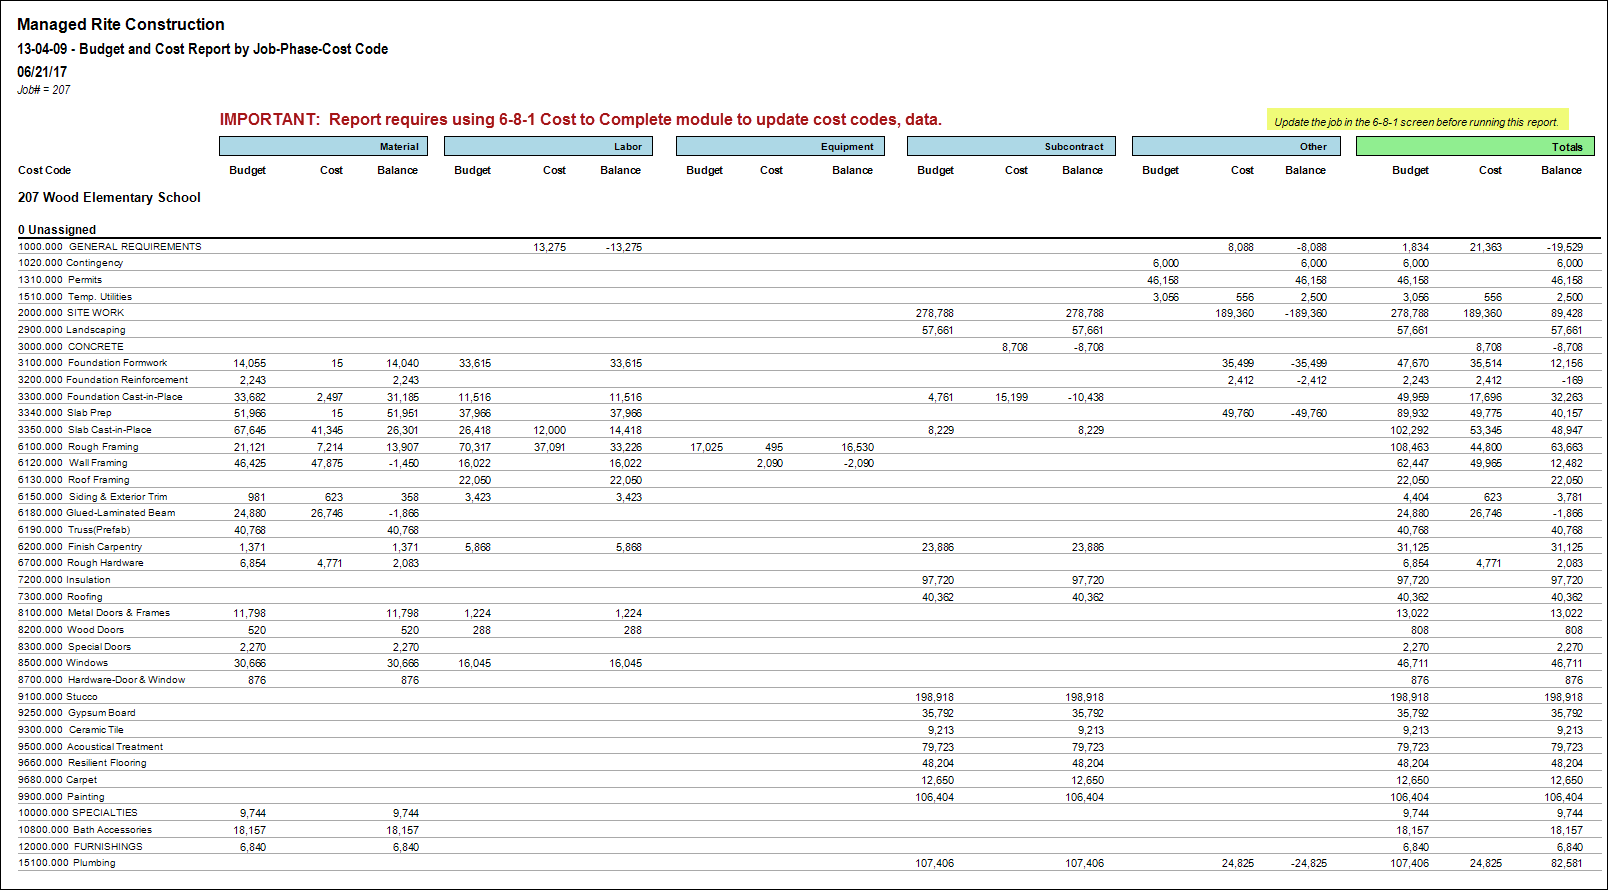 13-04-09 - Budget and Cost Report by Phase, Cost Types